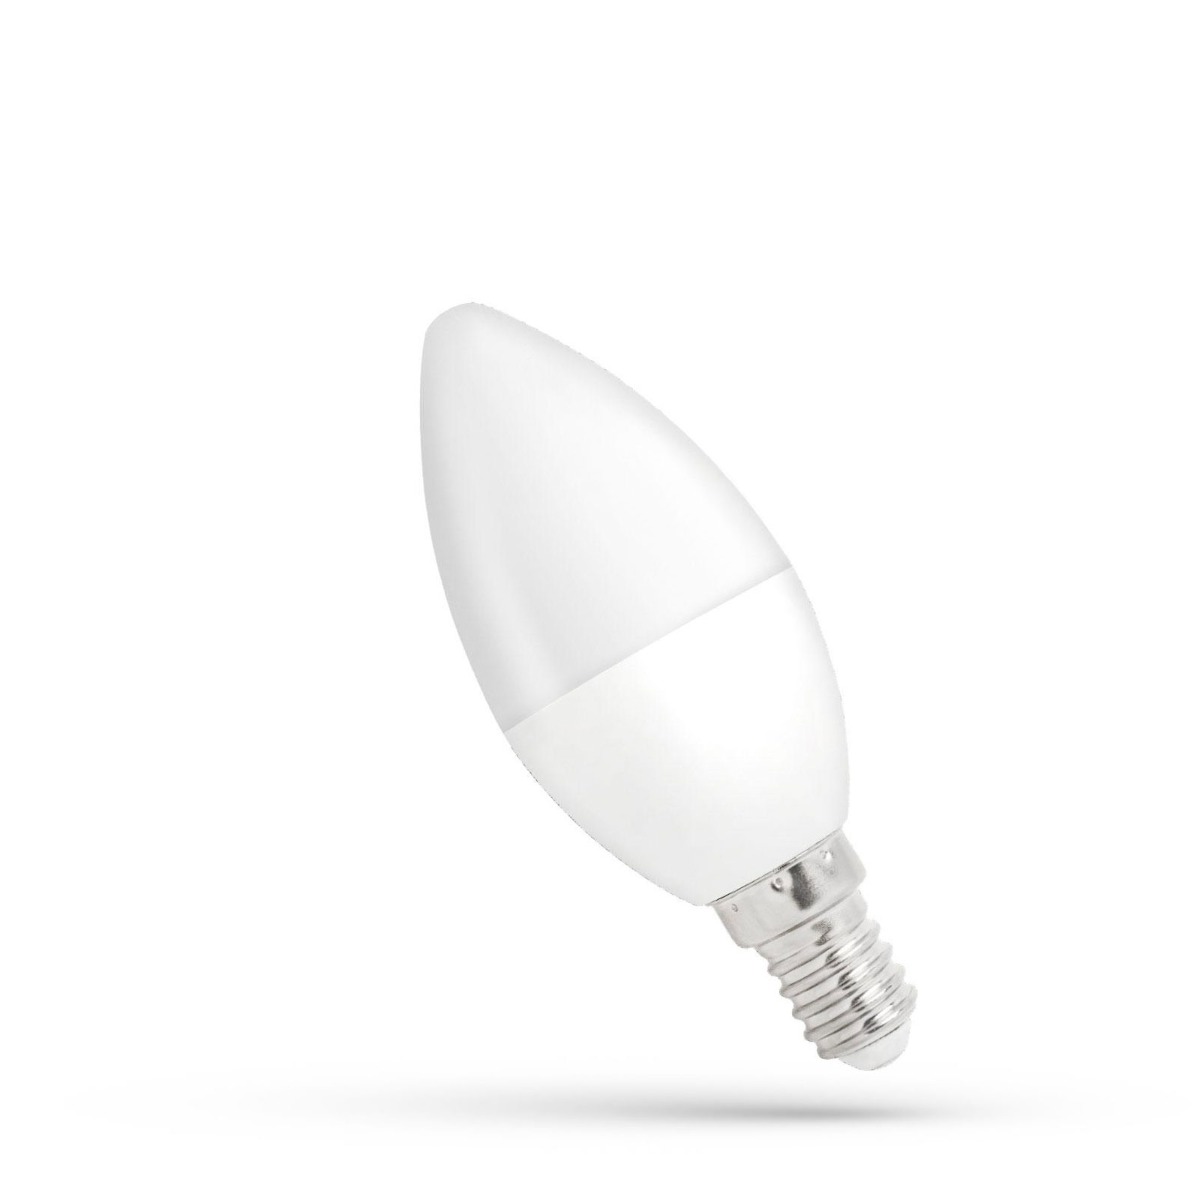 E14 lLED Light Bulb Flame Shape 6W Dimmable